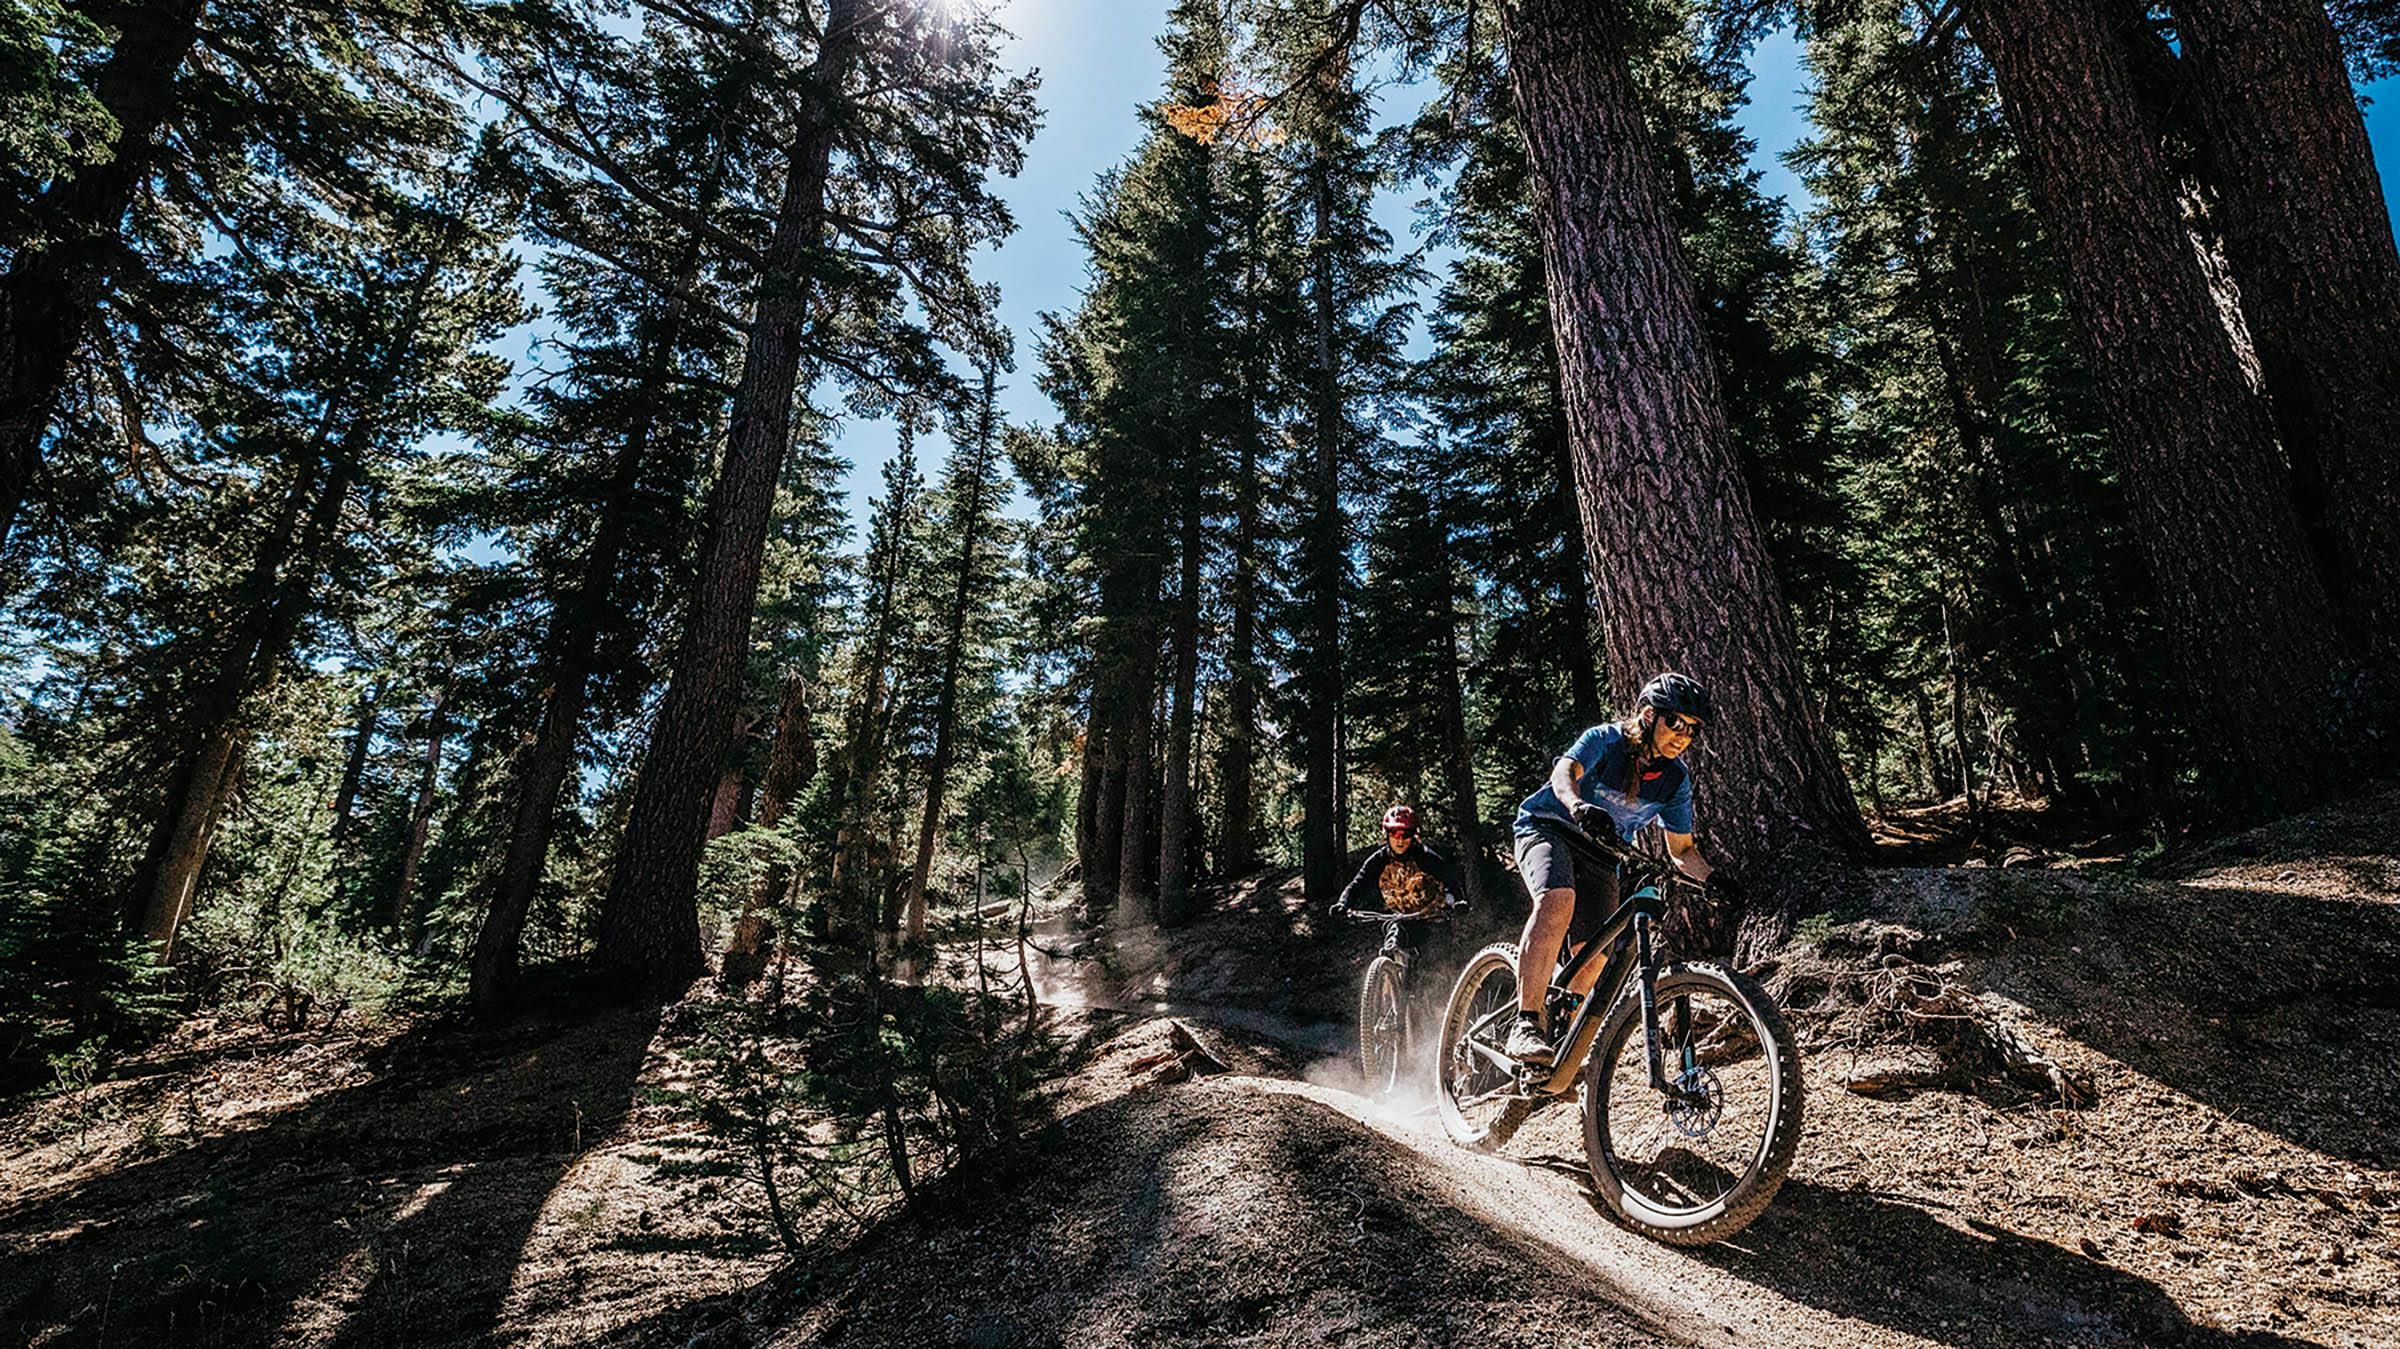 Mountain bikers in Mammoth Bike Park surrounded by tall trees